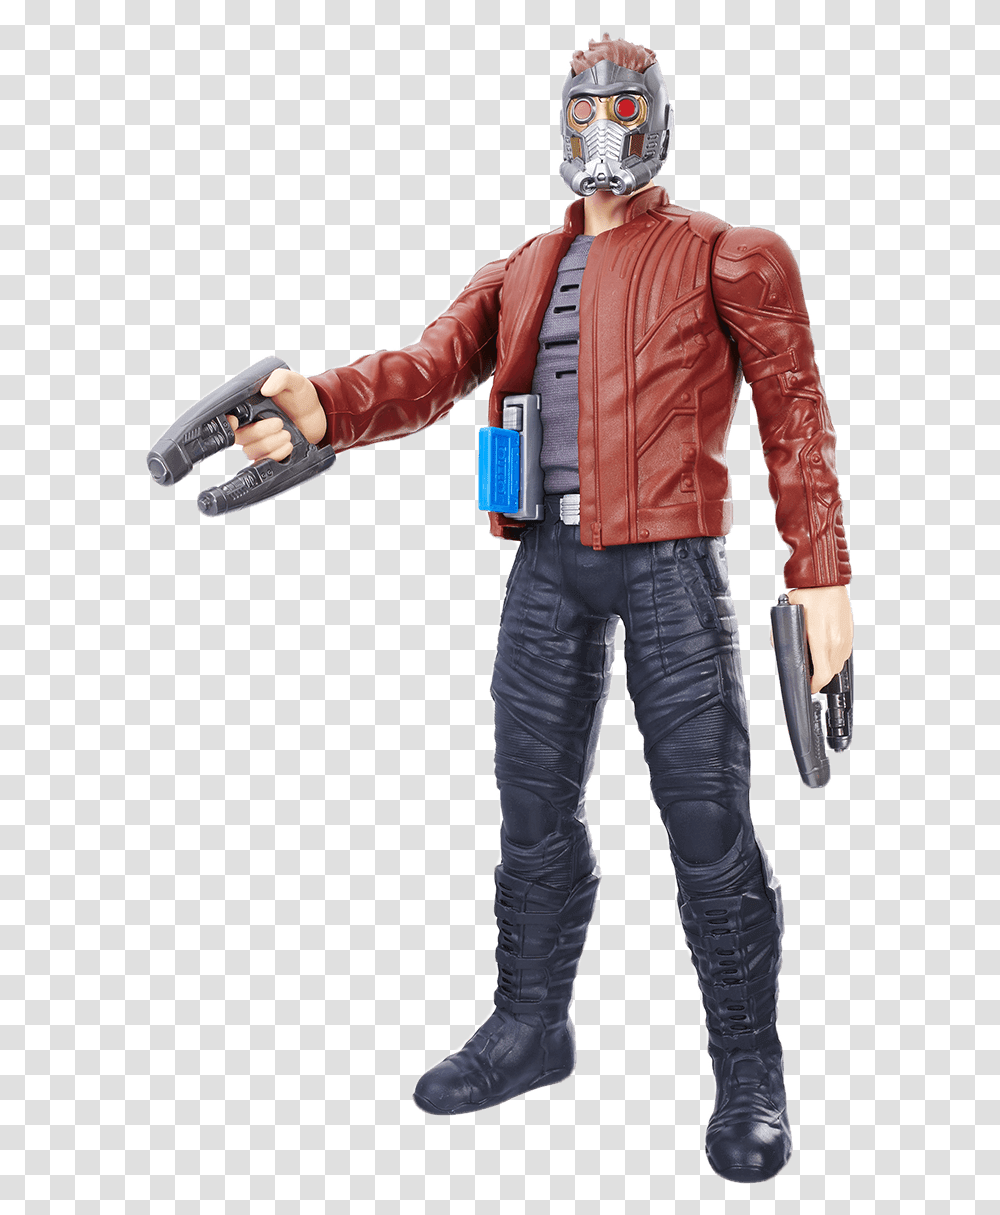 Star Lord Hd Images Guardians Of The Galaxy Star Lord, Apparel, Jacket, Coat Transparent Png